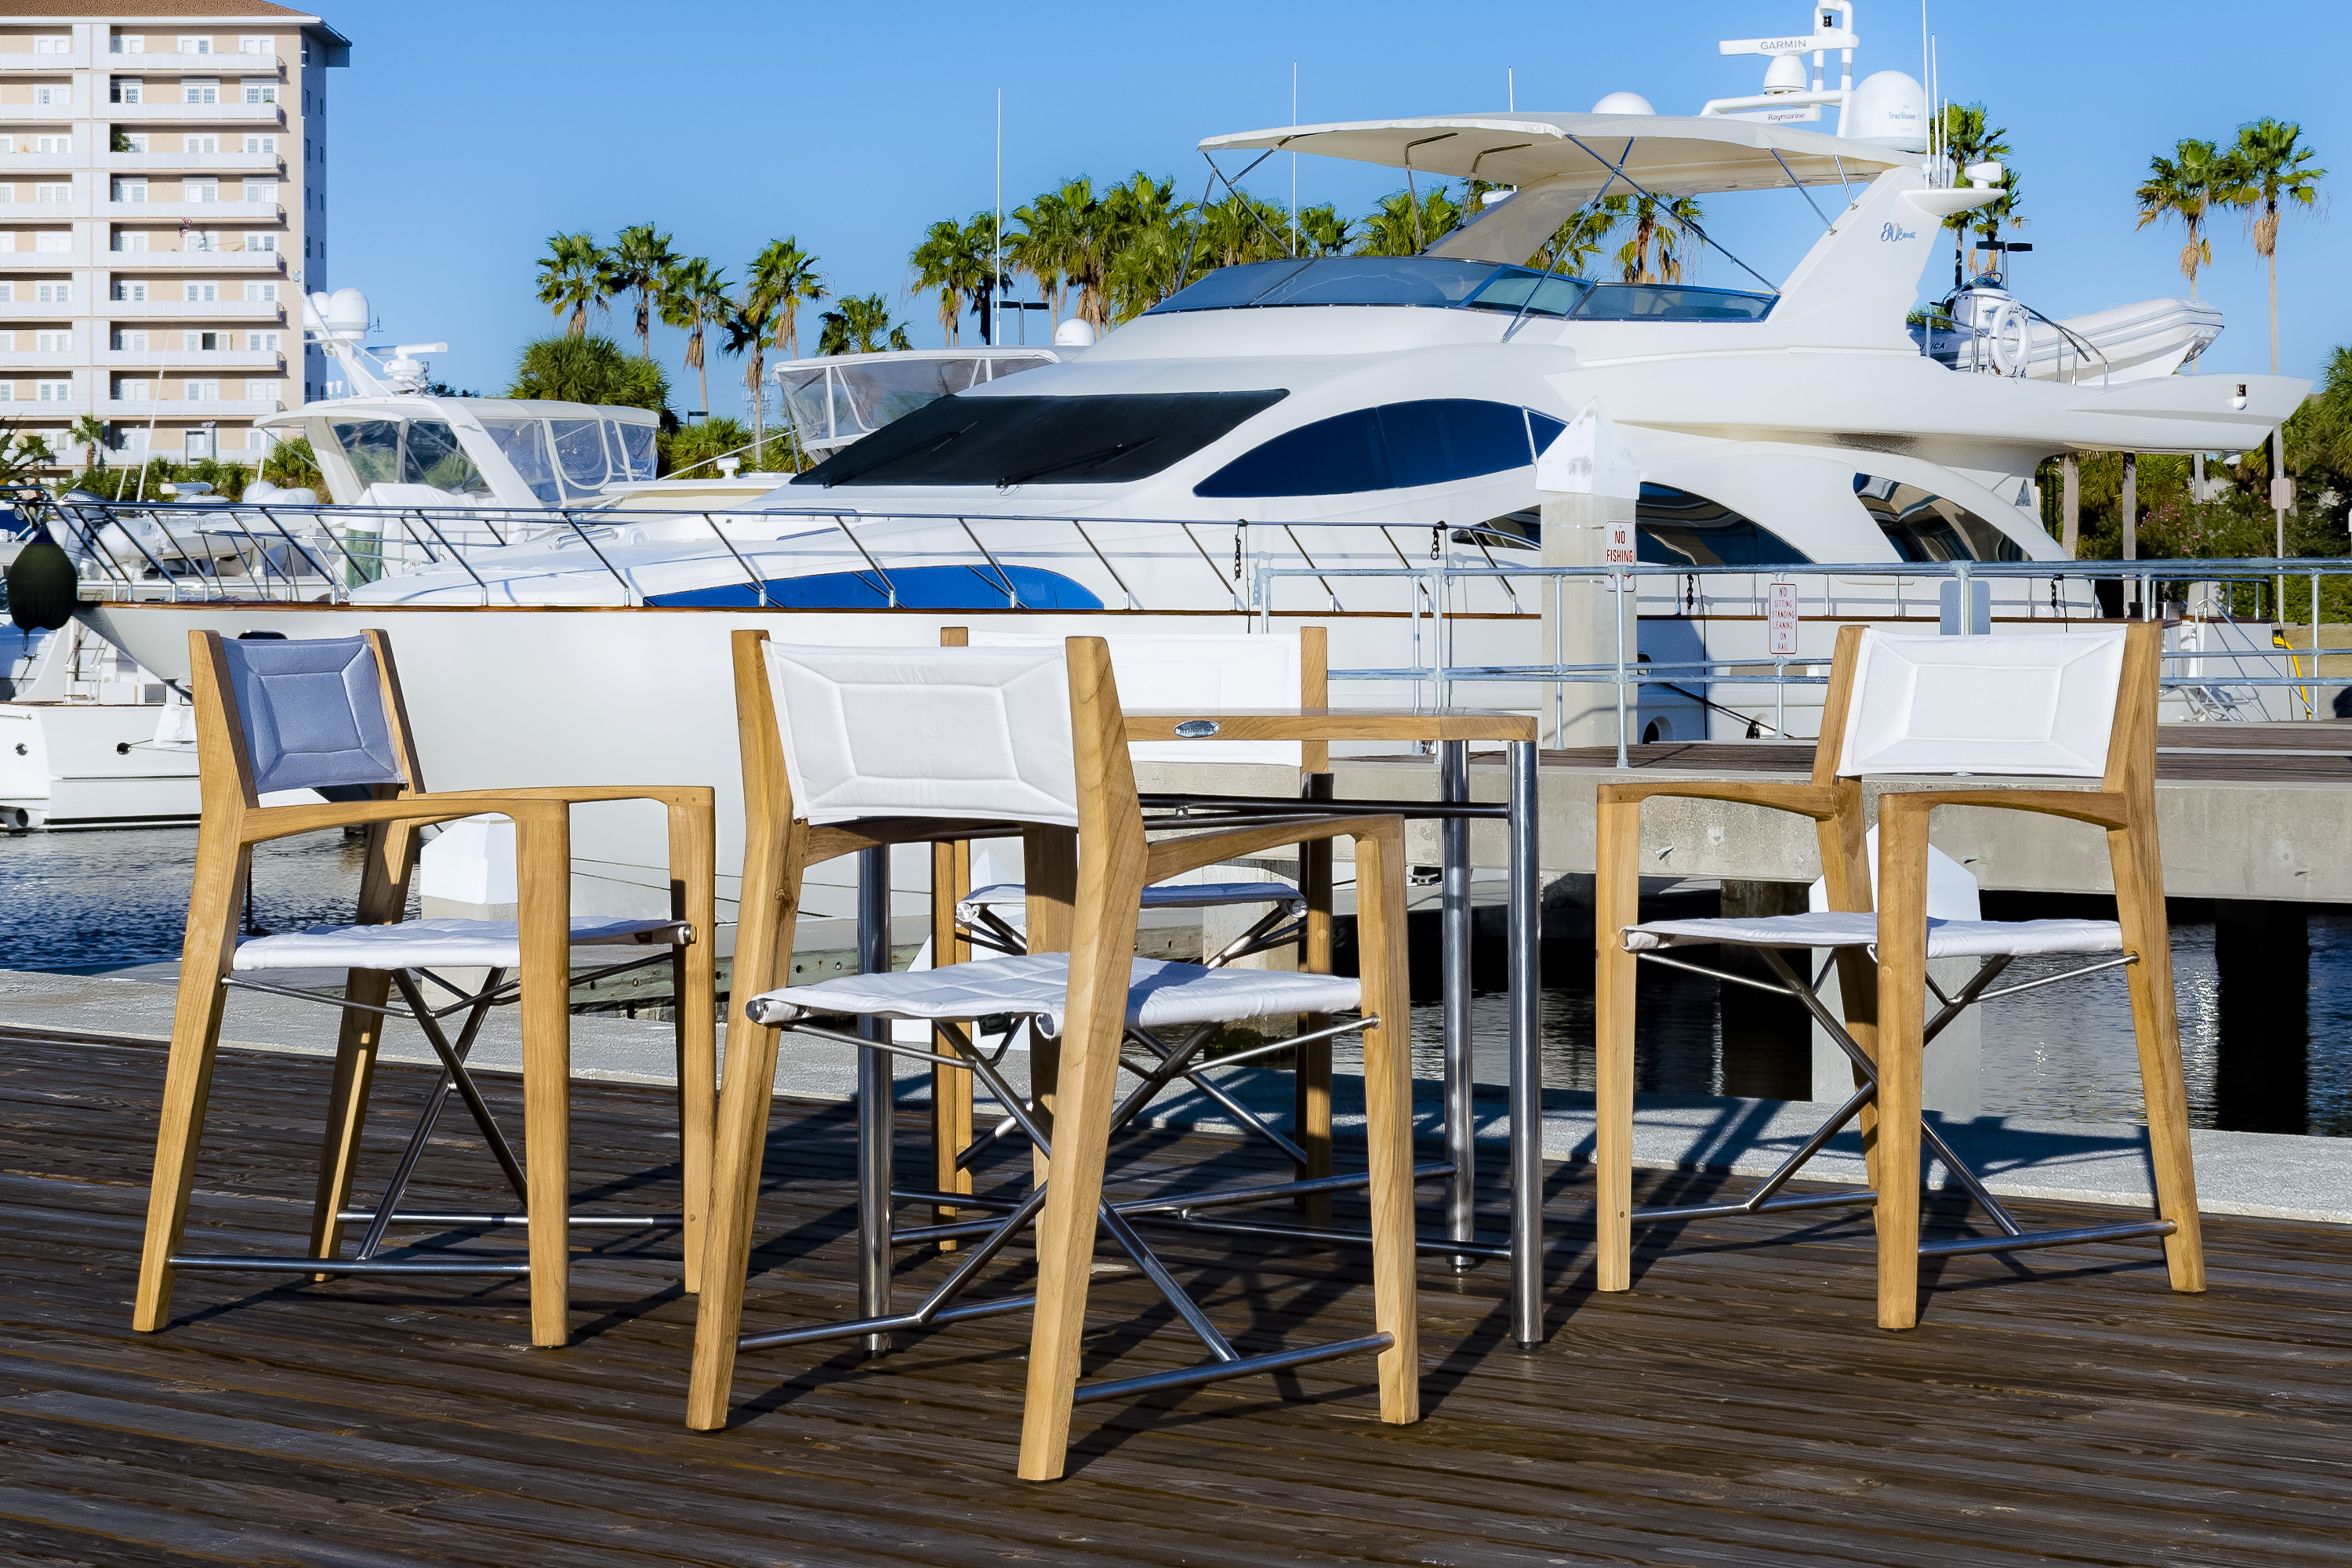 yacht rope furniture